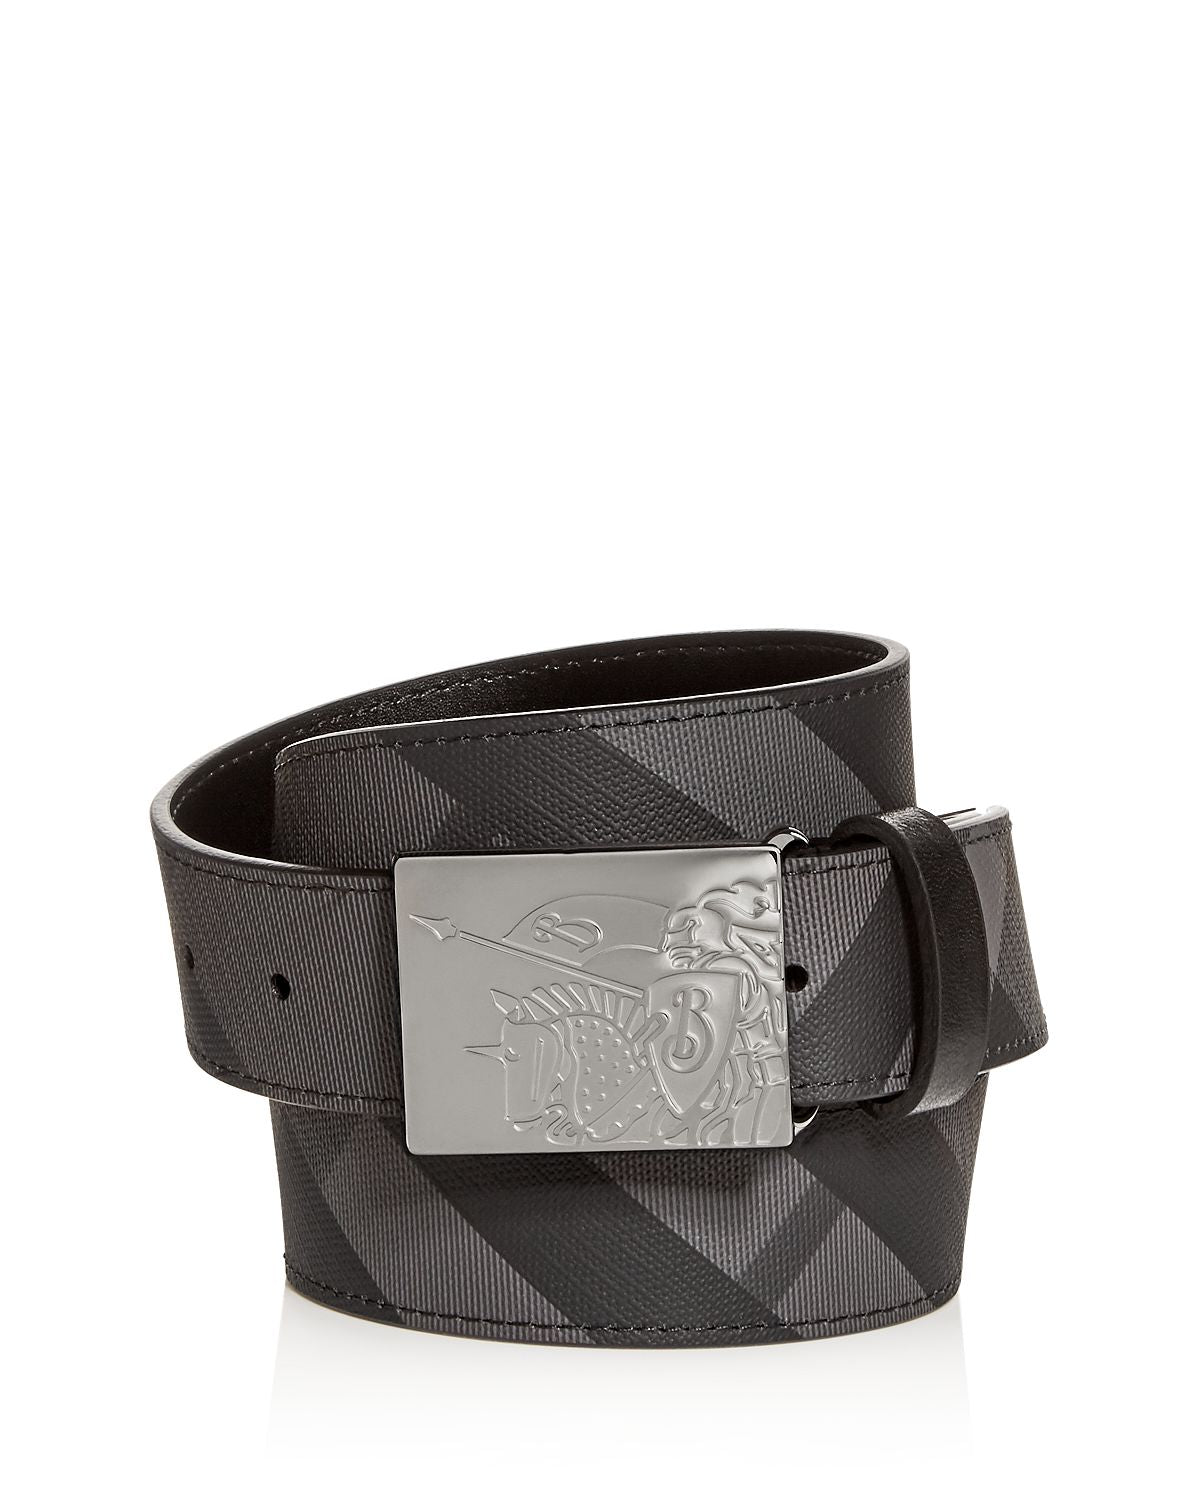 Burberry Plaque Buckle Check Leather Belt Charcoal/black